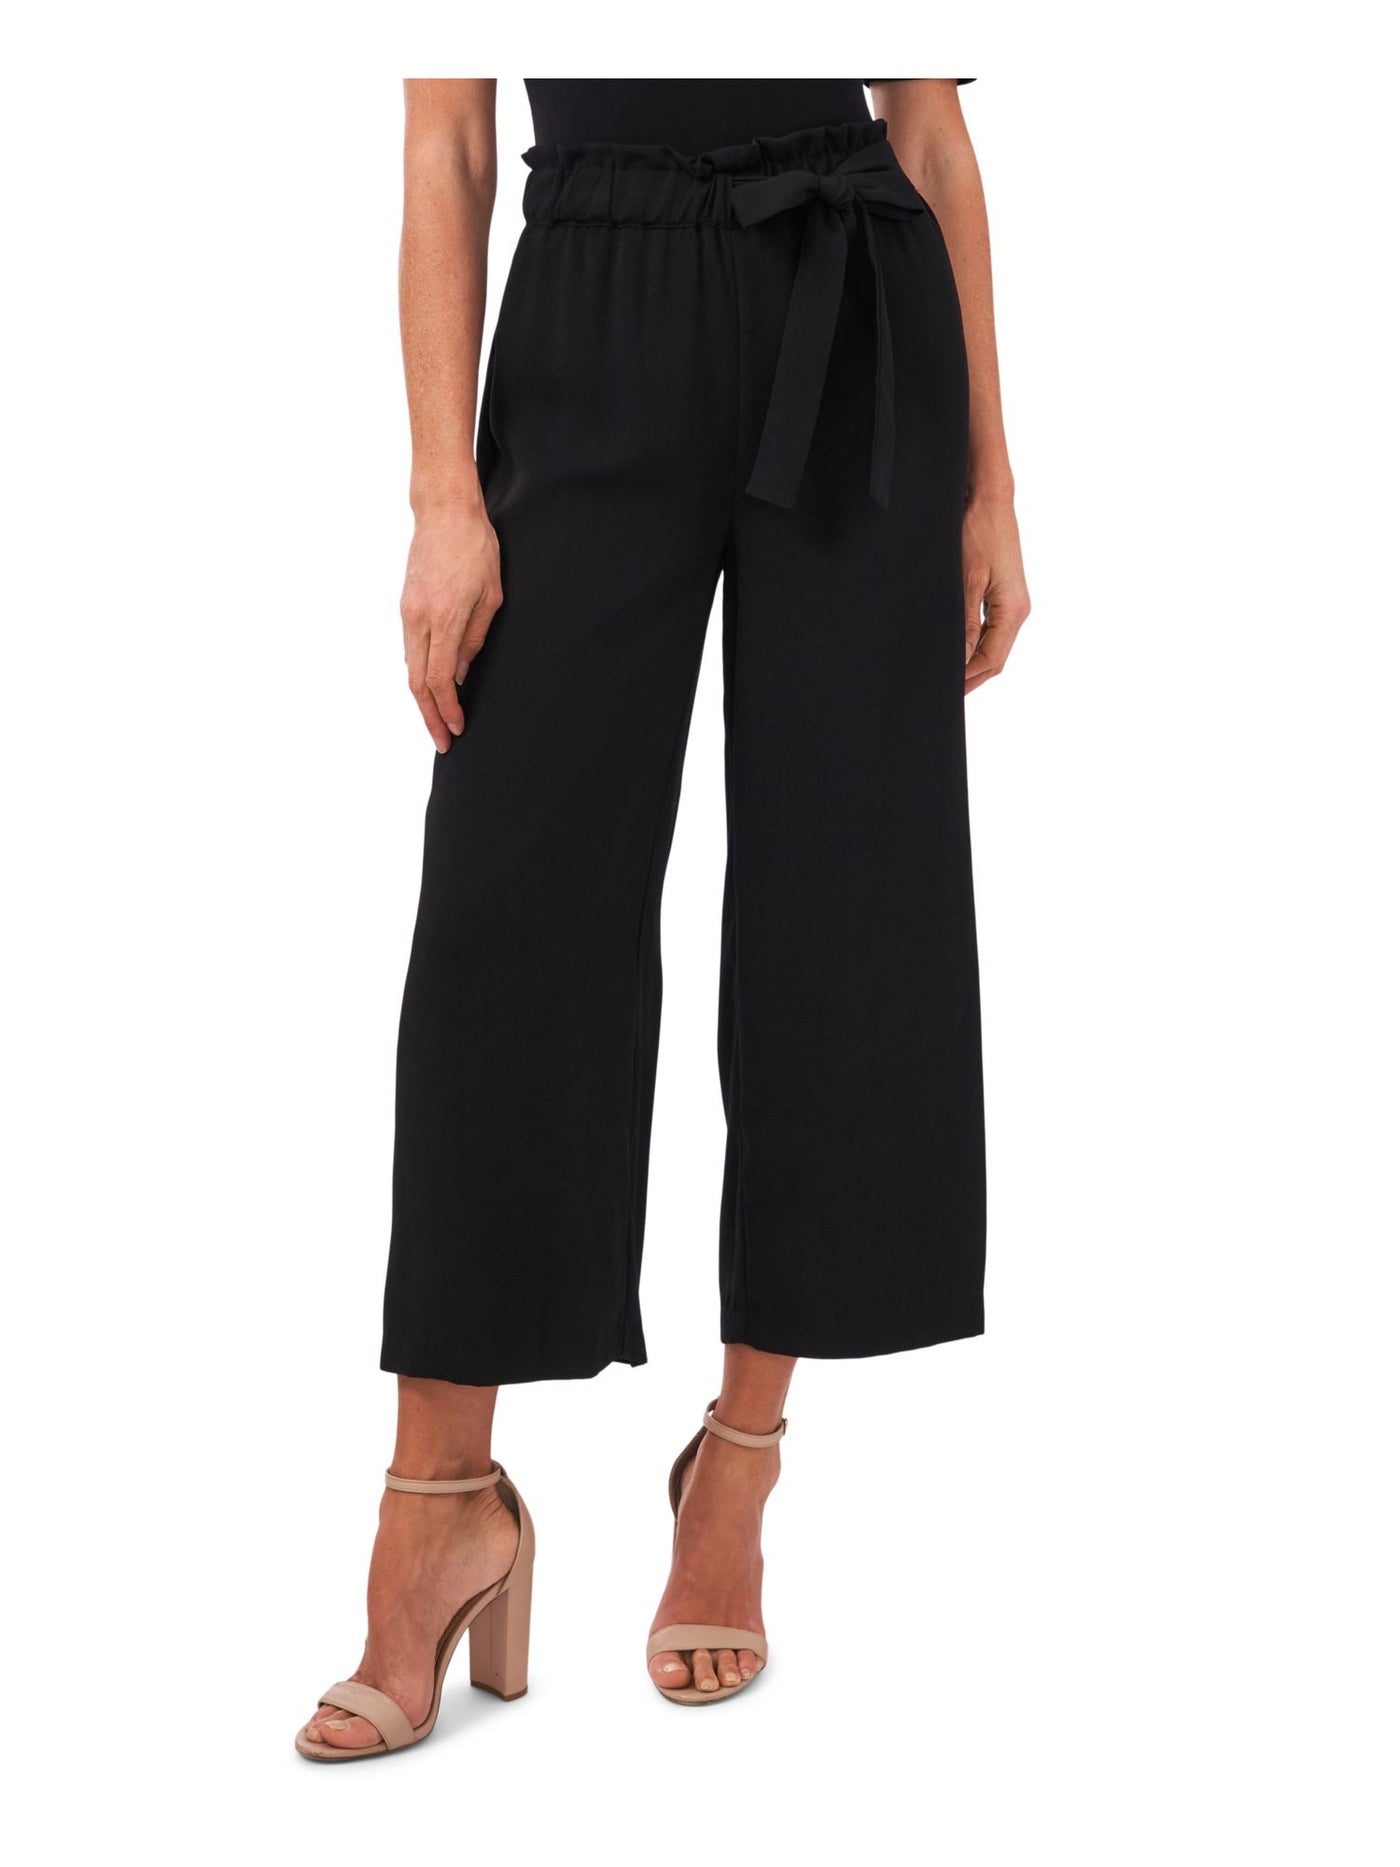 CECE Womens Black Belted Pocketed Cropped Crepe Wide Leg Pants 6